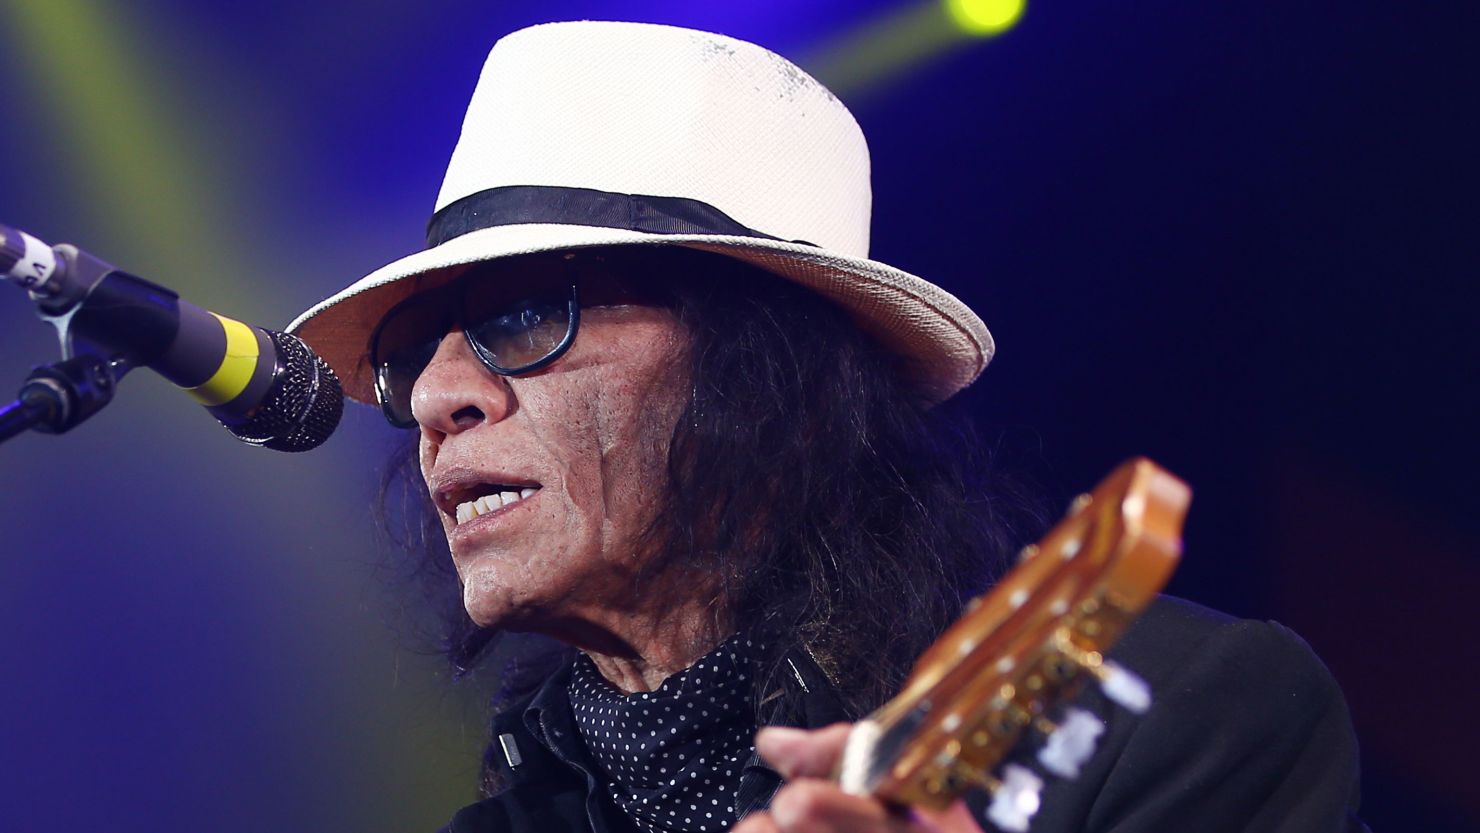 American songwriter Sixto Rodriguez performs on January 31, 2016 at the ICC Durban Arena in Durban, South Africa.